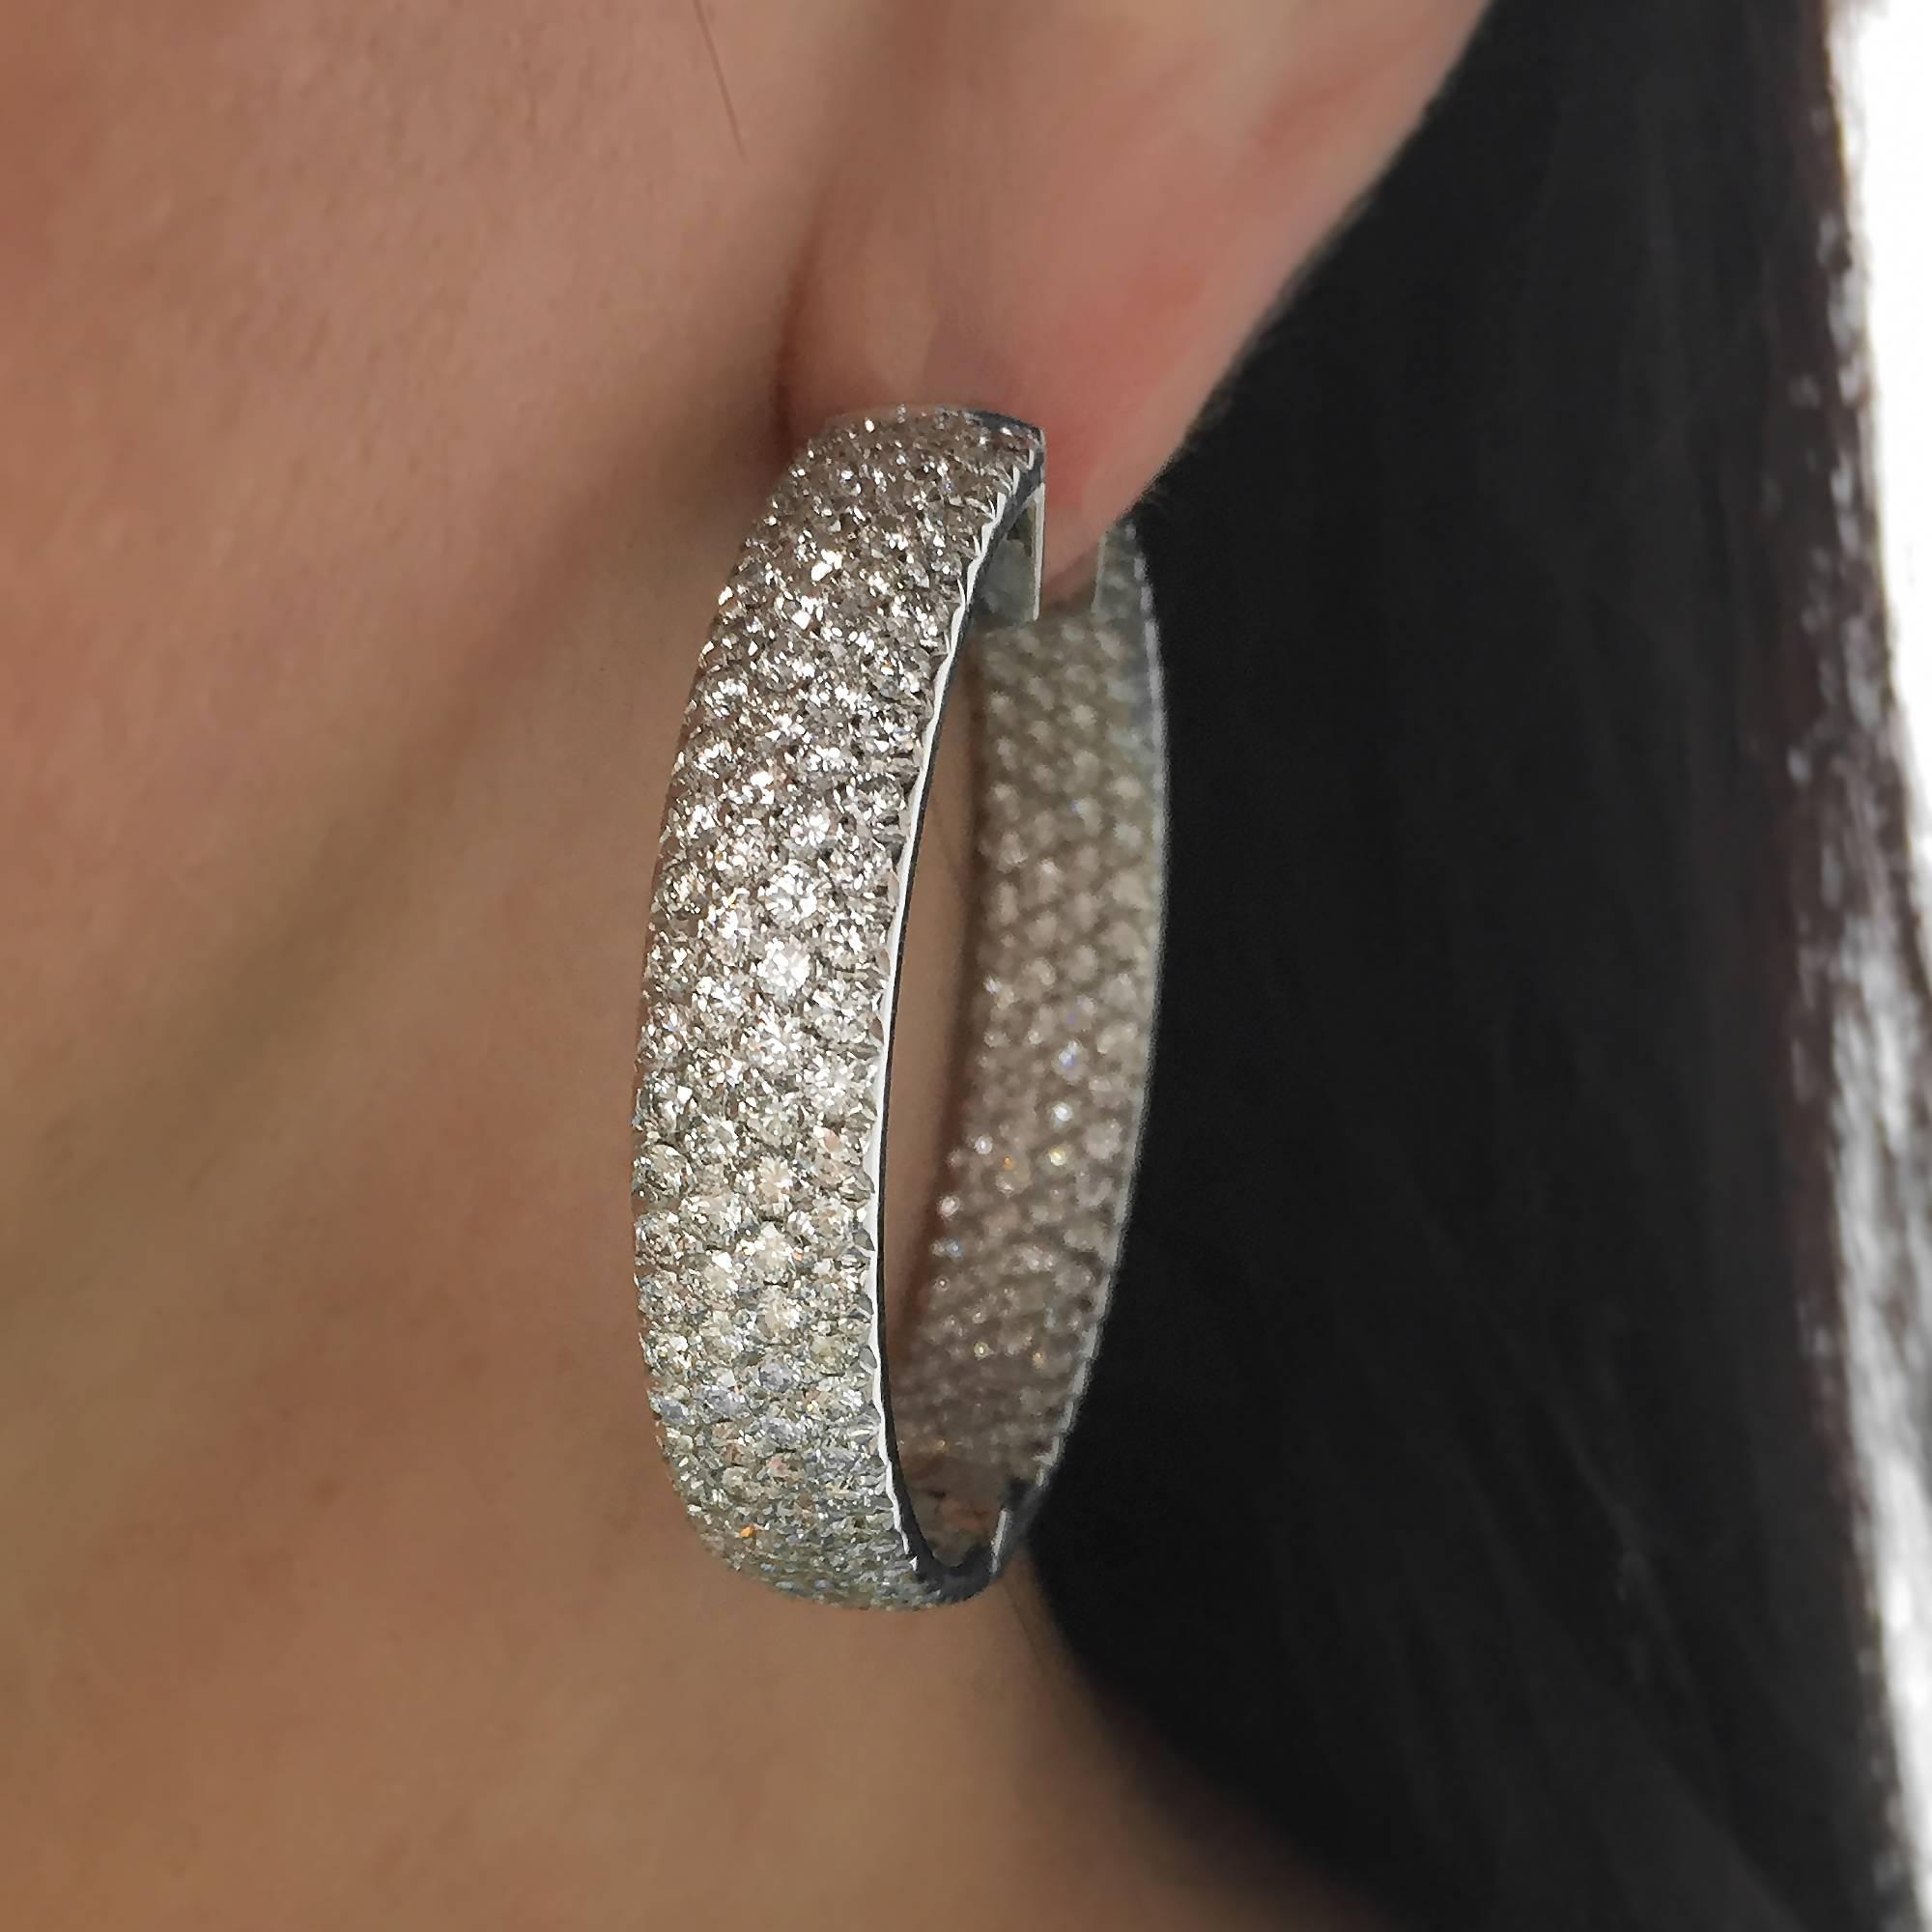 These gorgeous inside out hoop earrings feature a total of 396 pave set round brilliant cut diamonds, which are estimated to weigh 10.00ctw and grade as G-H in color and VS in clarity on a GIA diamond grading scale. The stones are set in 18k white